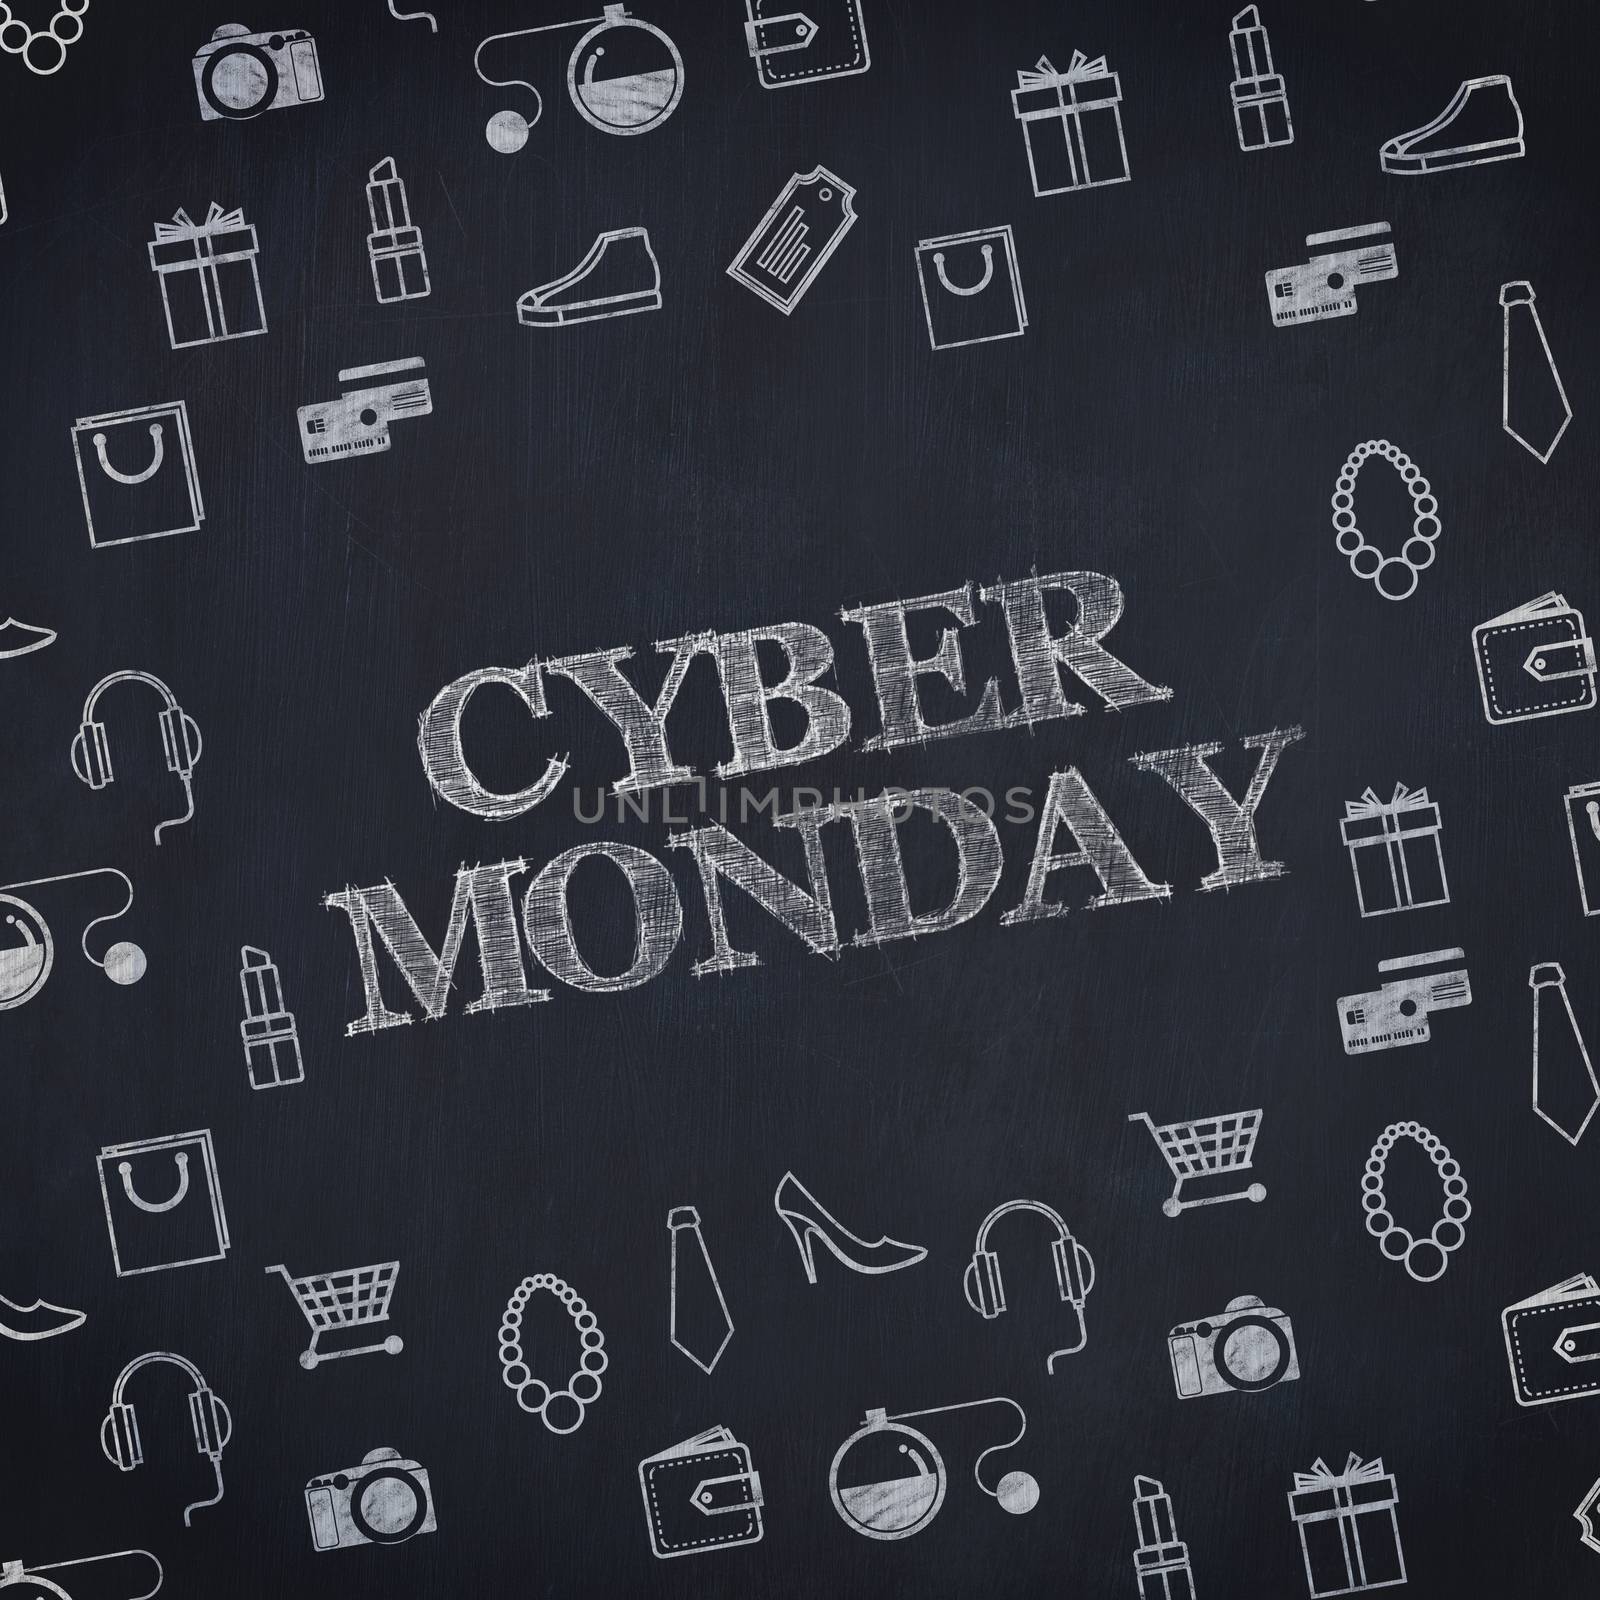 Title for celebration of cyber Monday  by Wavebreakmedia